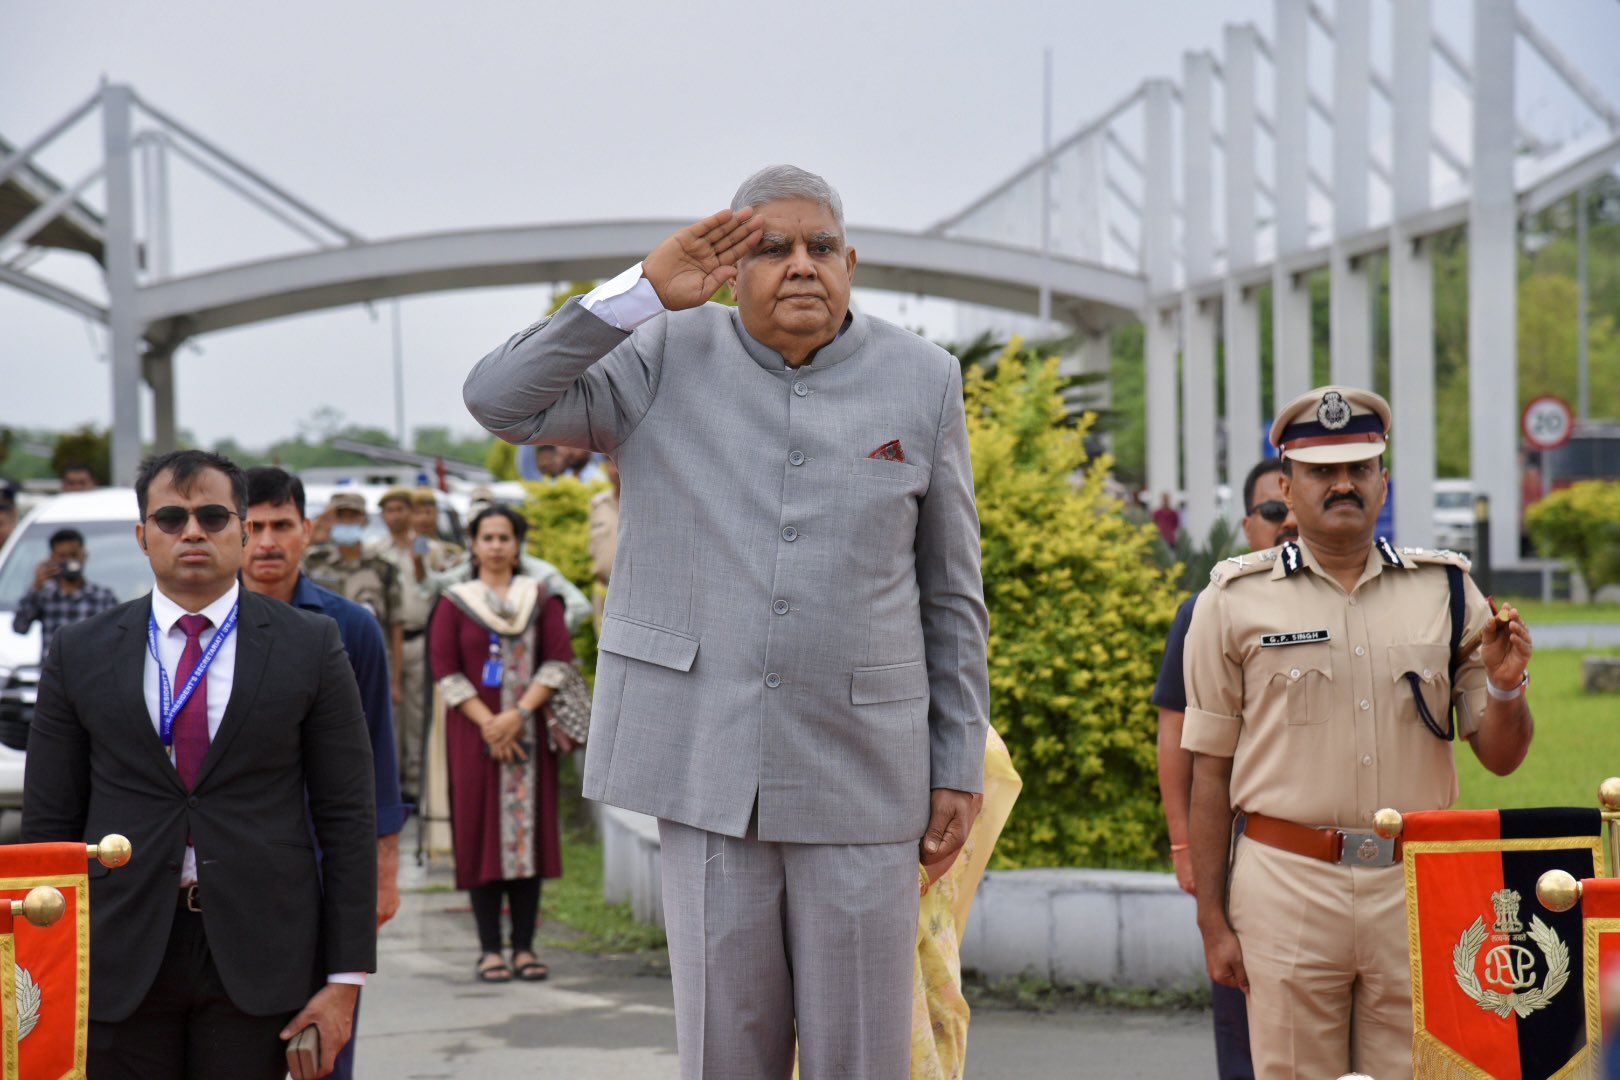 The Vice President, Shri Jagdeep Dhankhar inspecting the Guard of Honour in Dibrugarh, Assam on May 3, 2023.